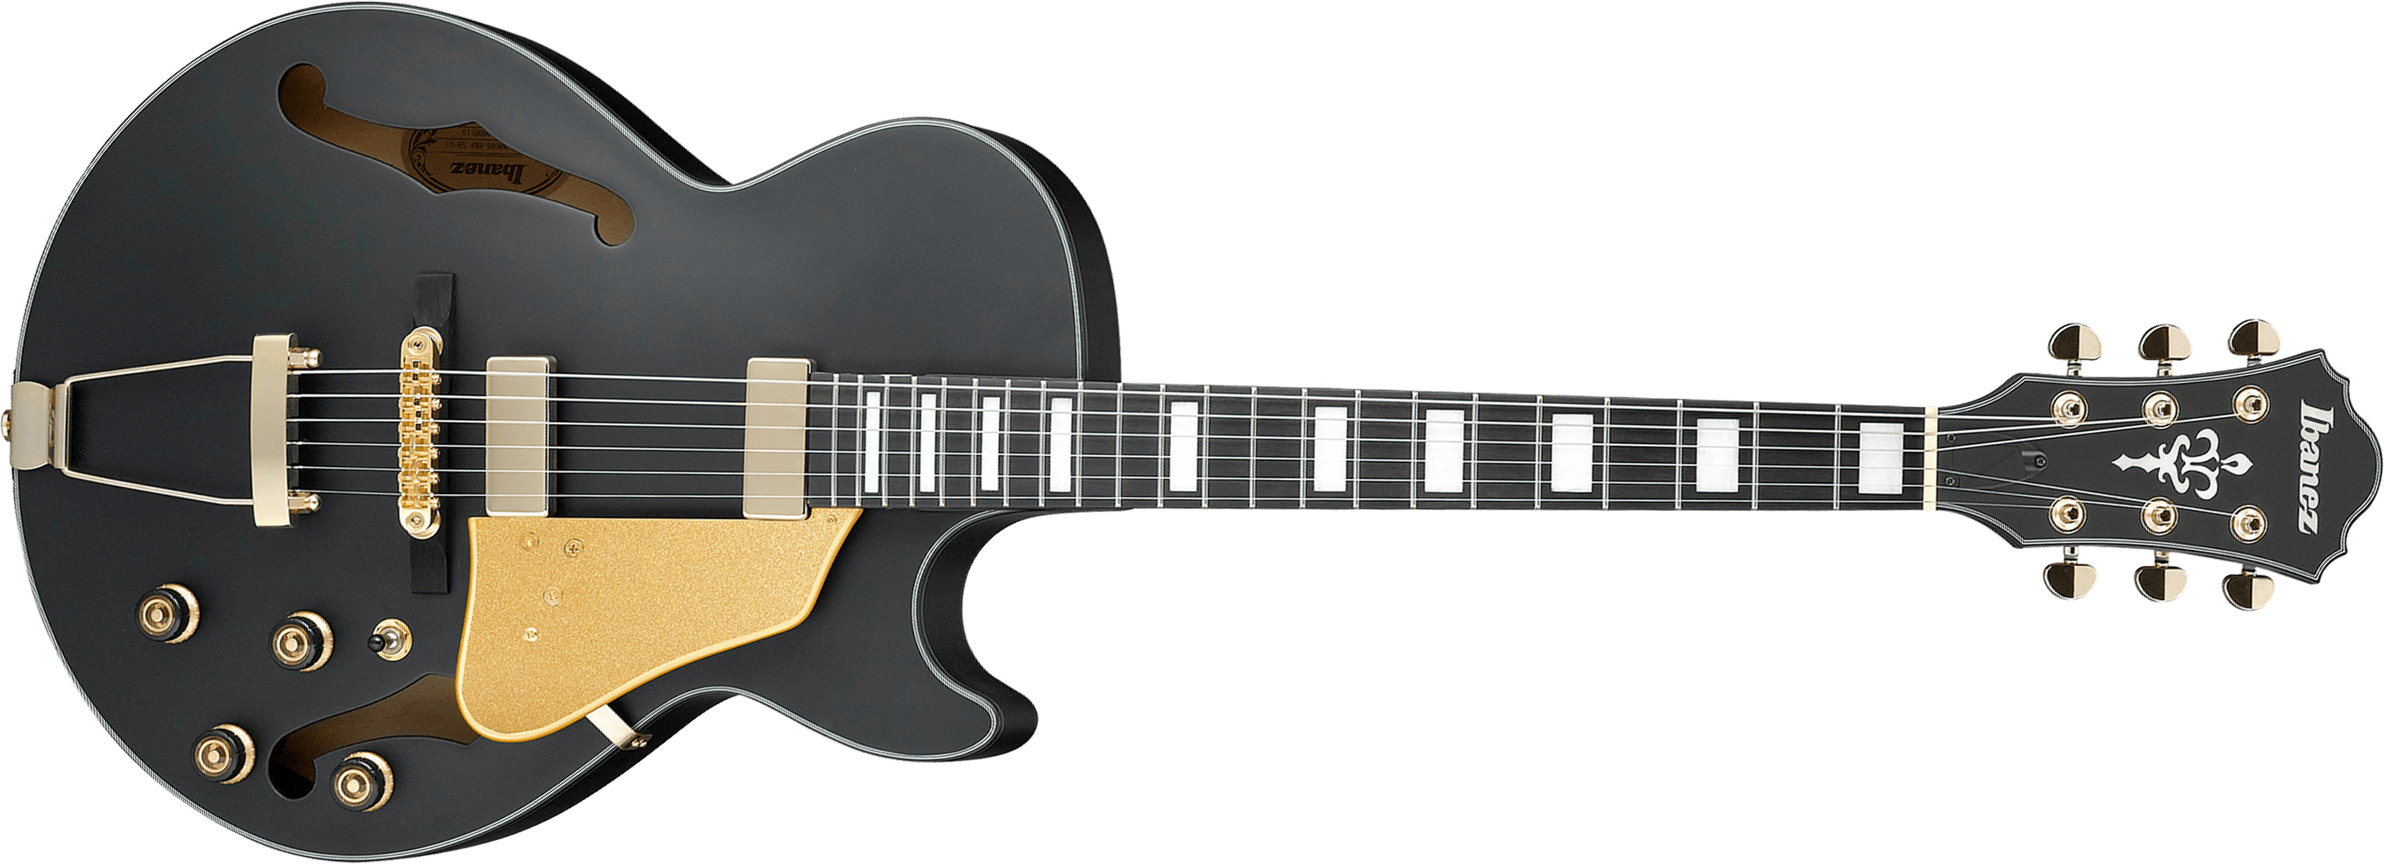 Ibanez Ag85 Bkf Artcore Expressionist Ht Hh Eb - Black Flat - Hollow-body electric guitar - Main picture